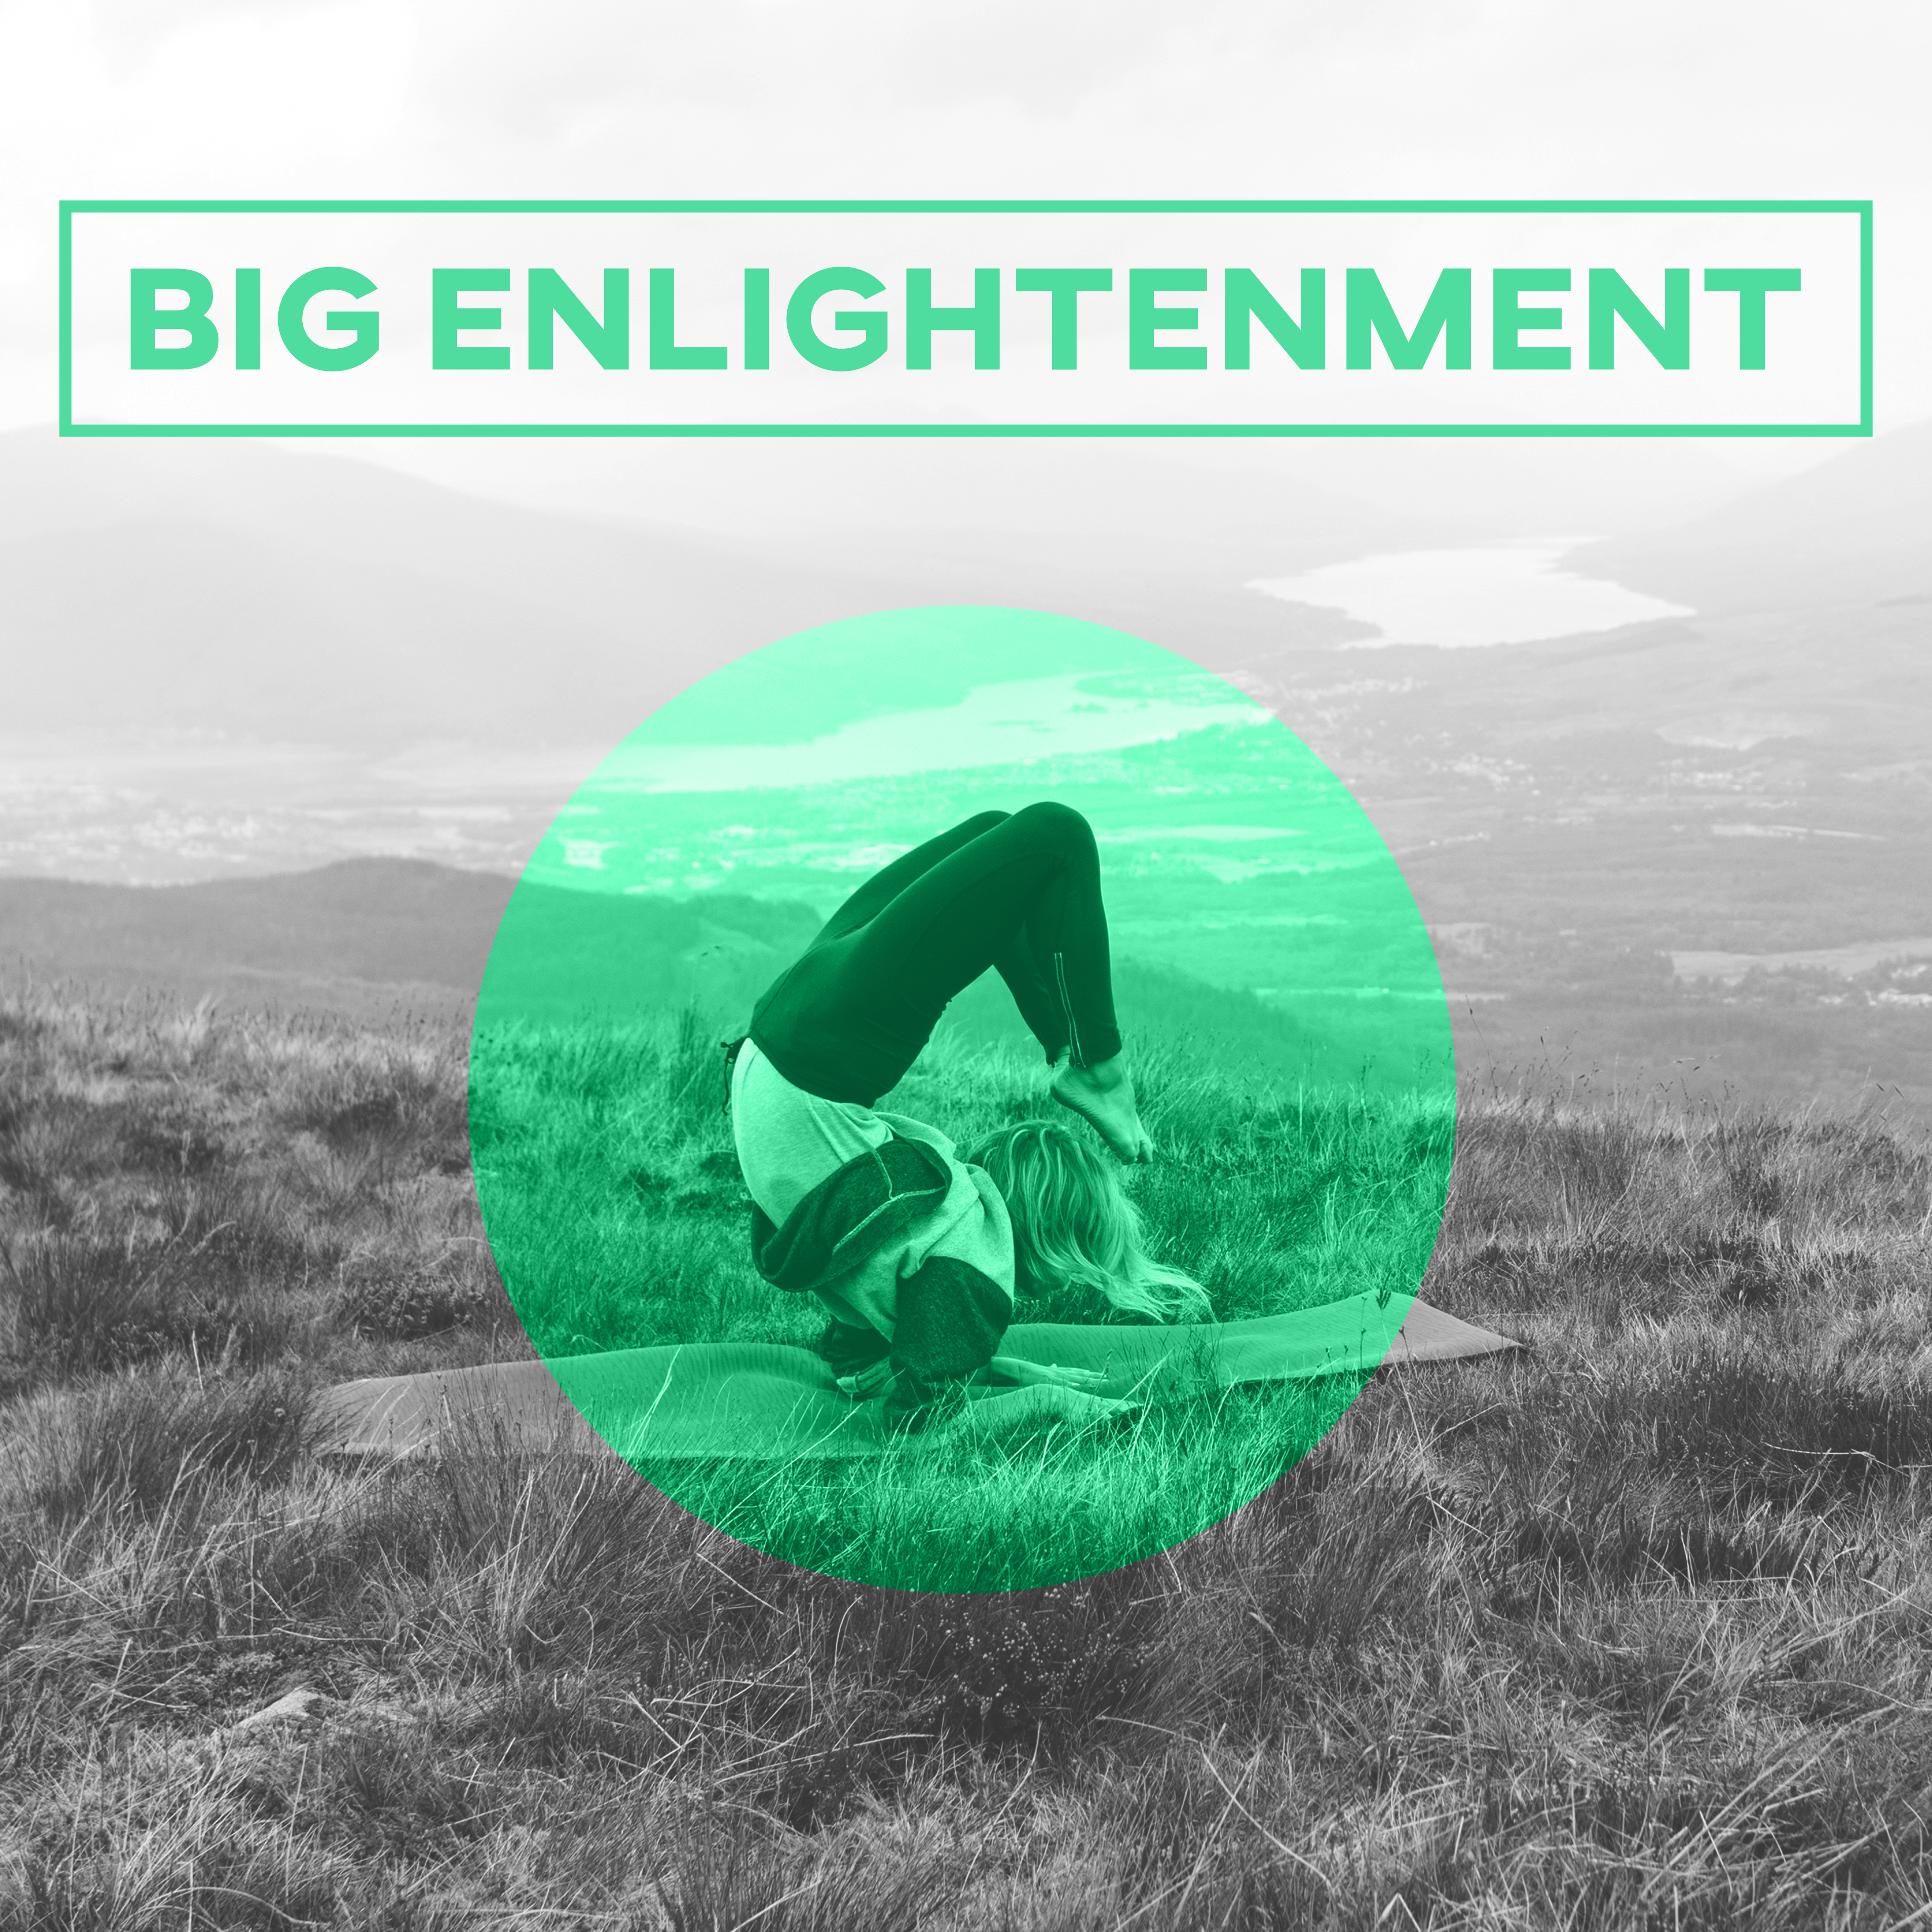 Big Enlightenment – Safety,  Position, Successful, Cleanliness, Snuffing